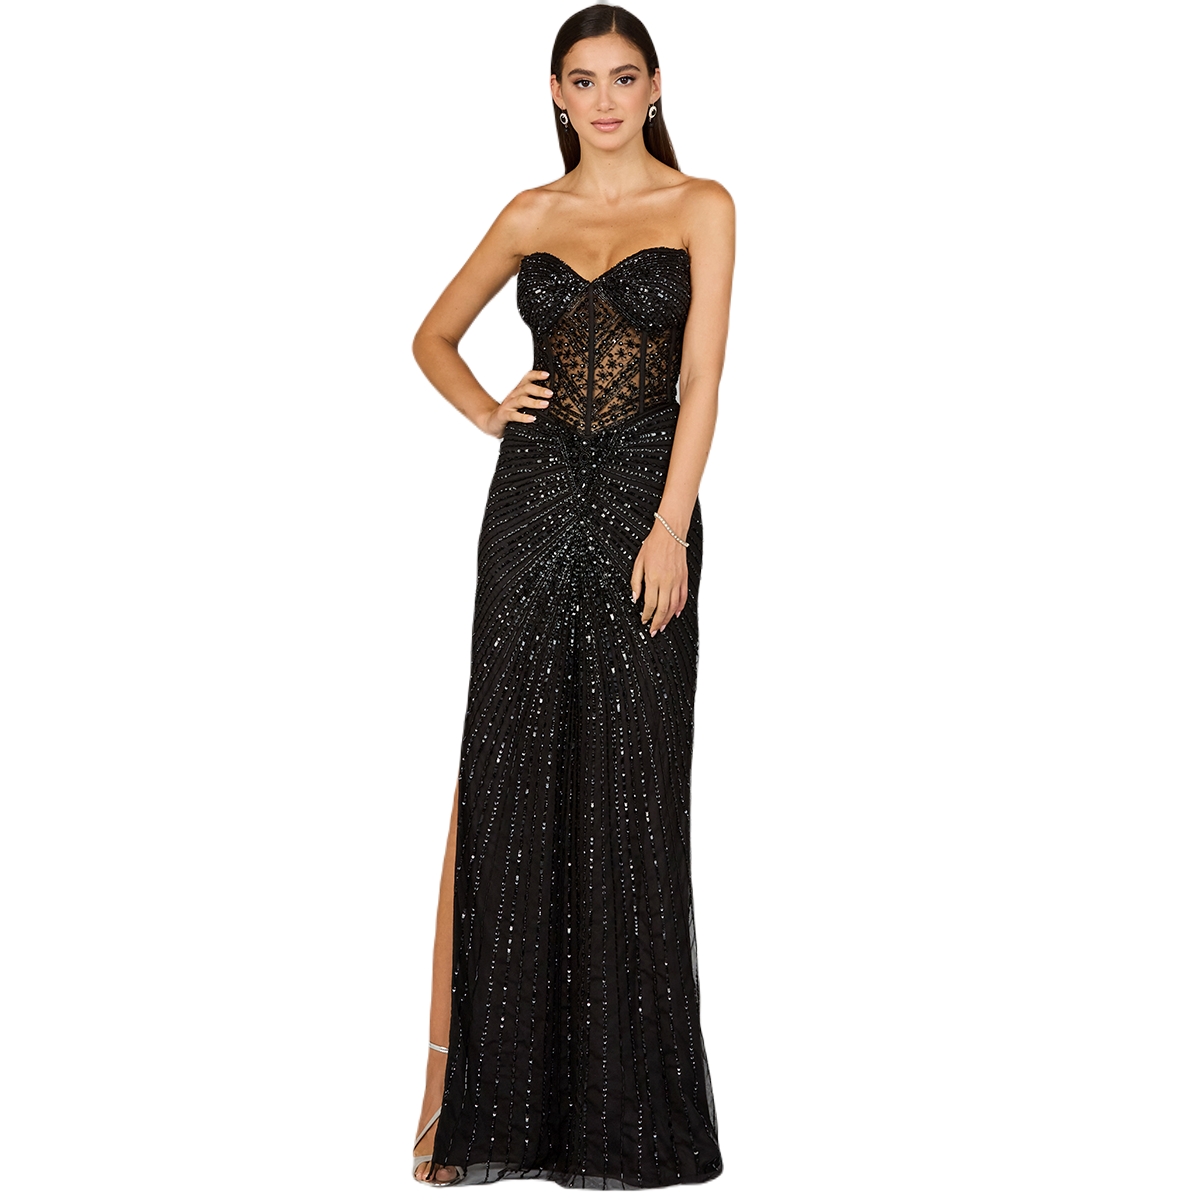 Women's Embellished Strapless Gown with Slit - Black